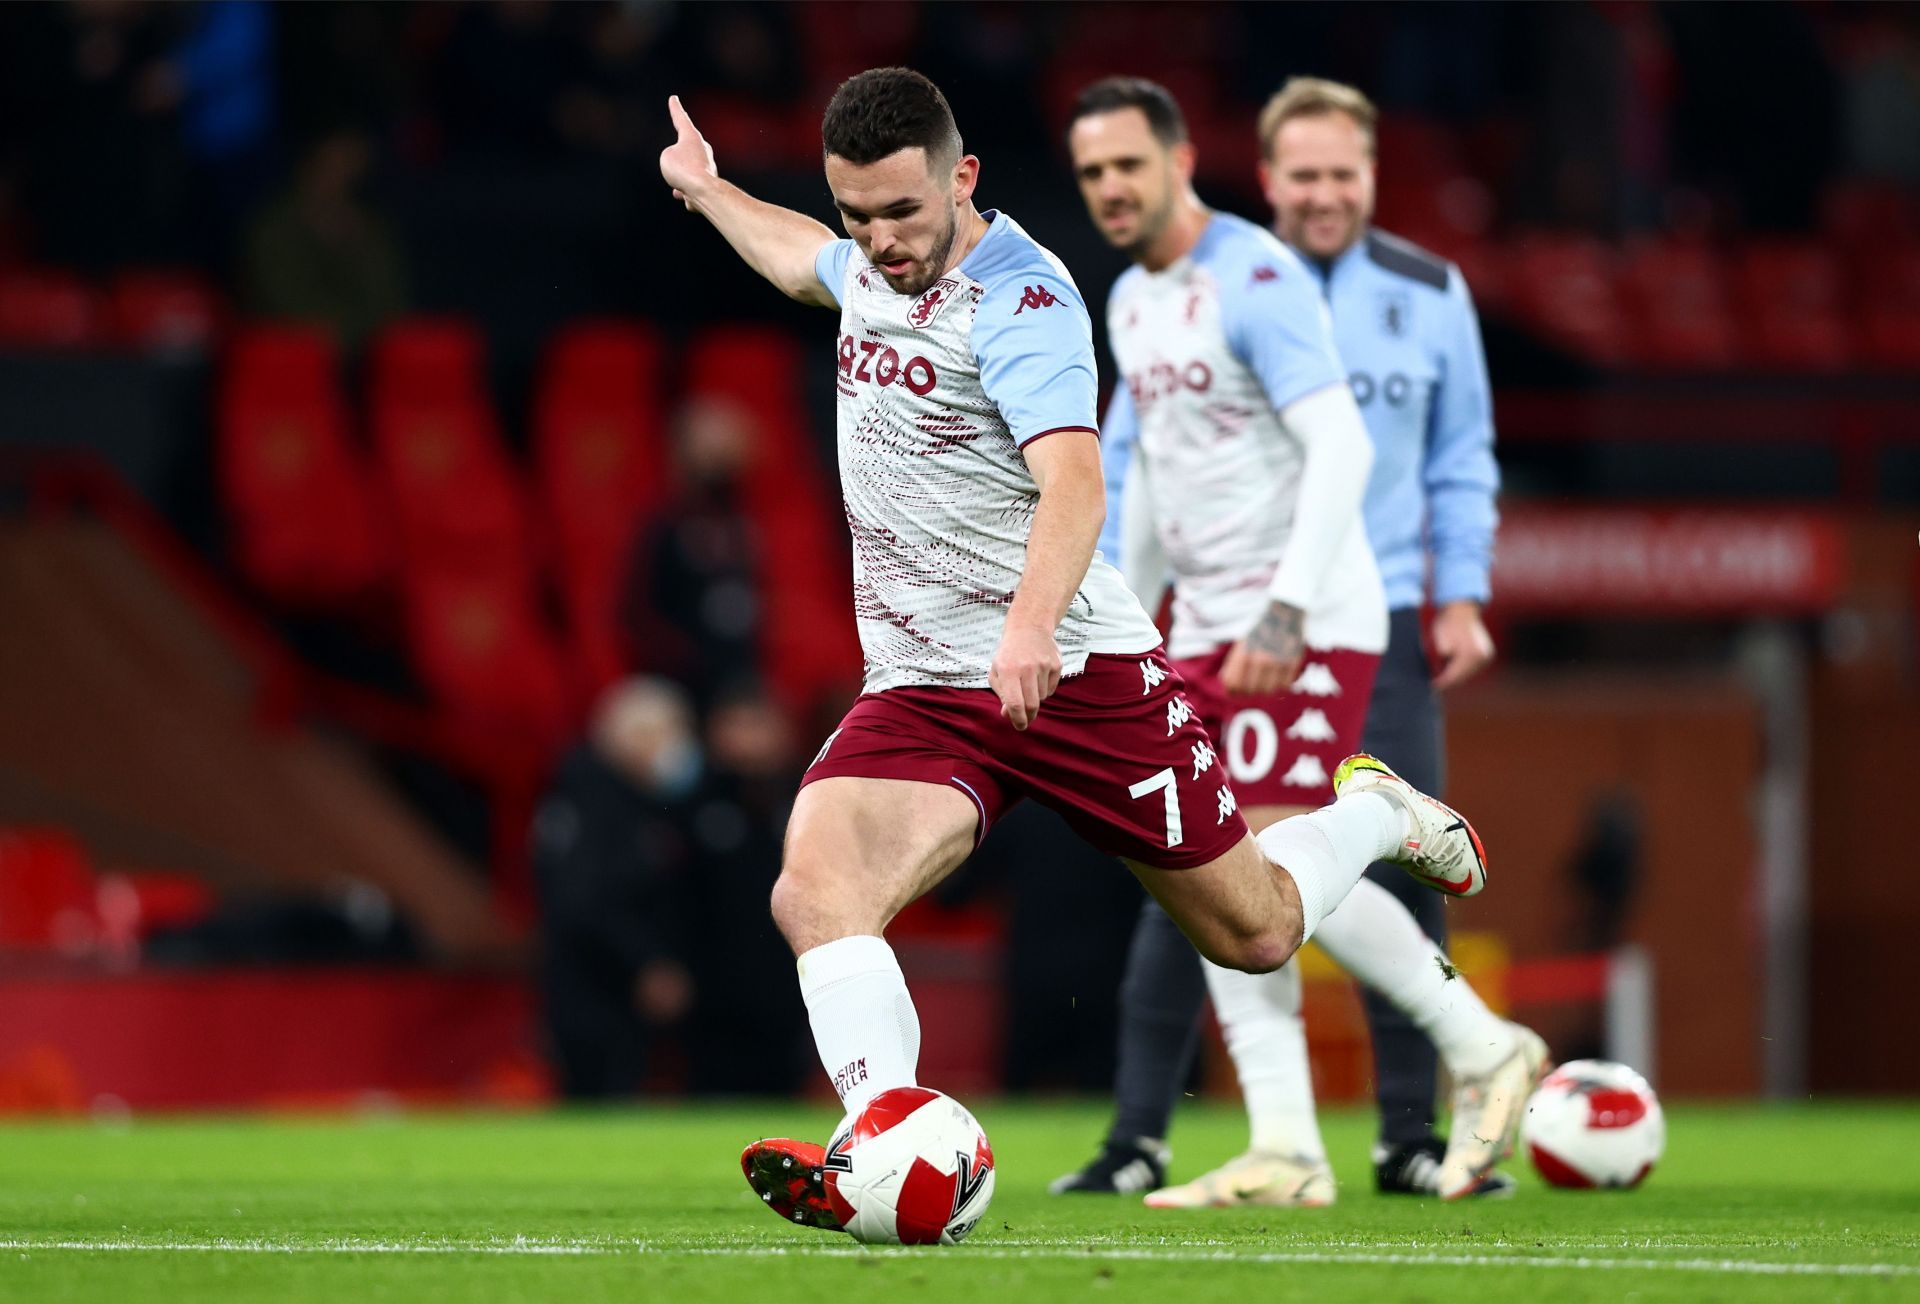 Gerard has no intention of letting McGinn leave for Manchester United.